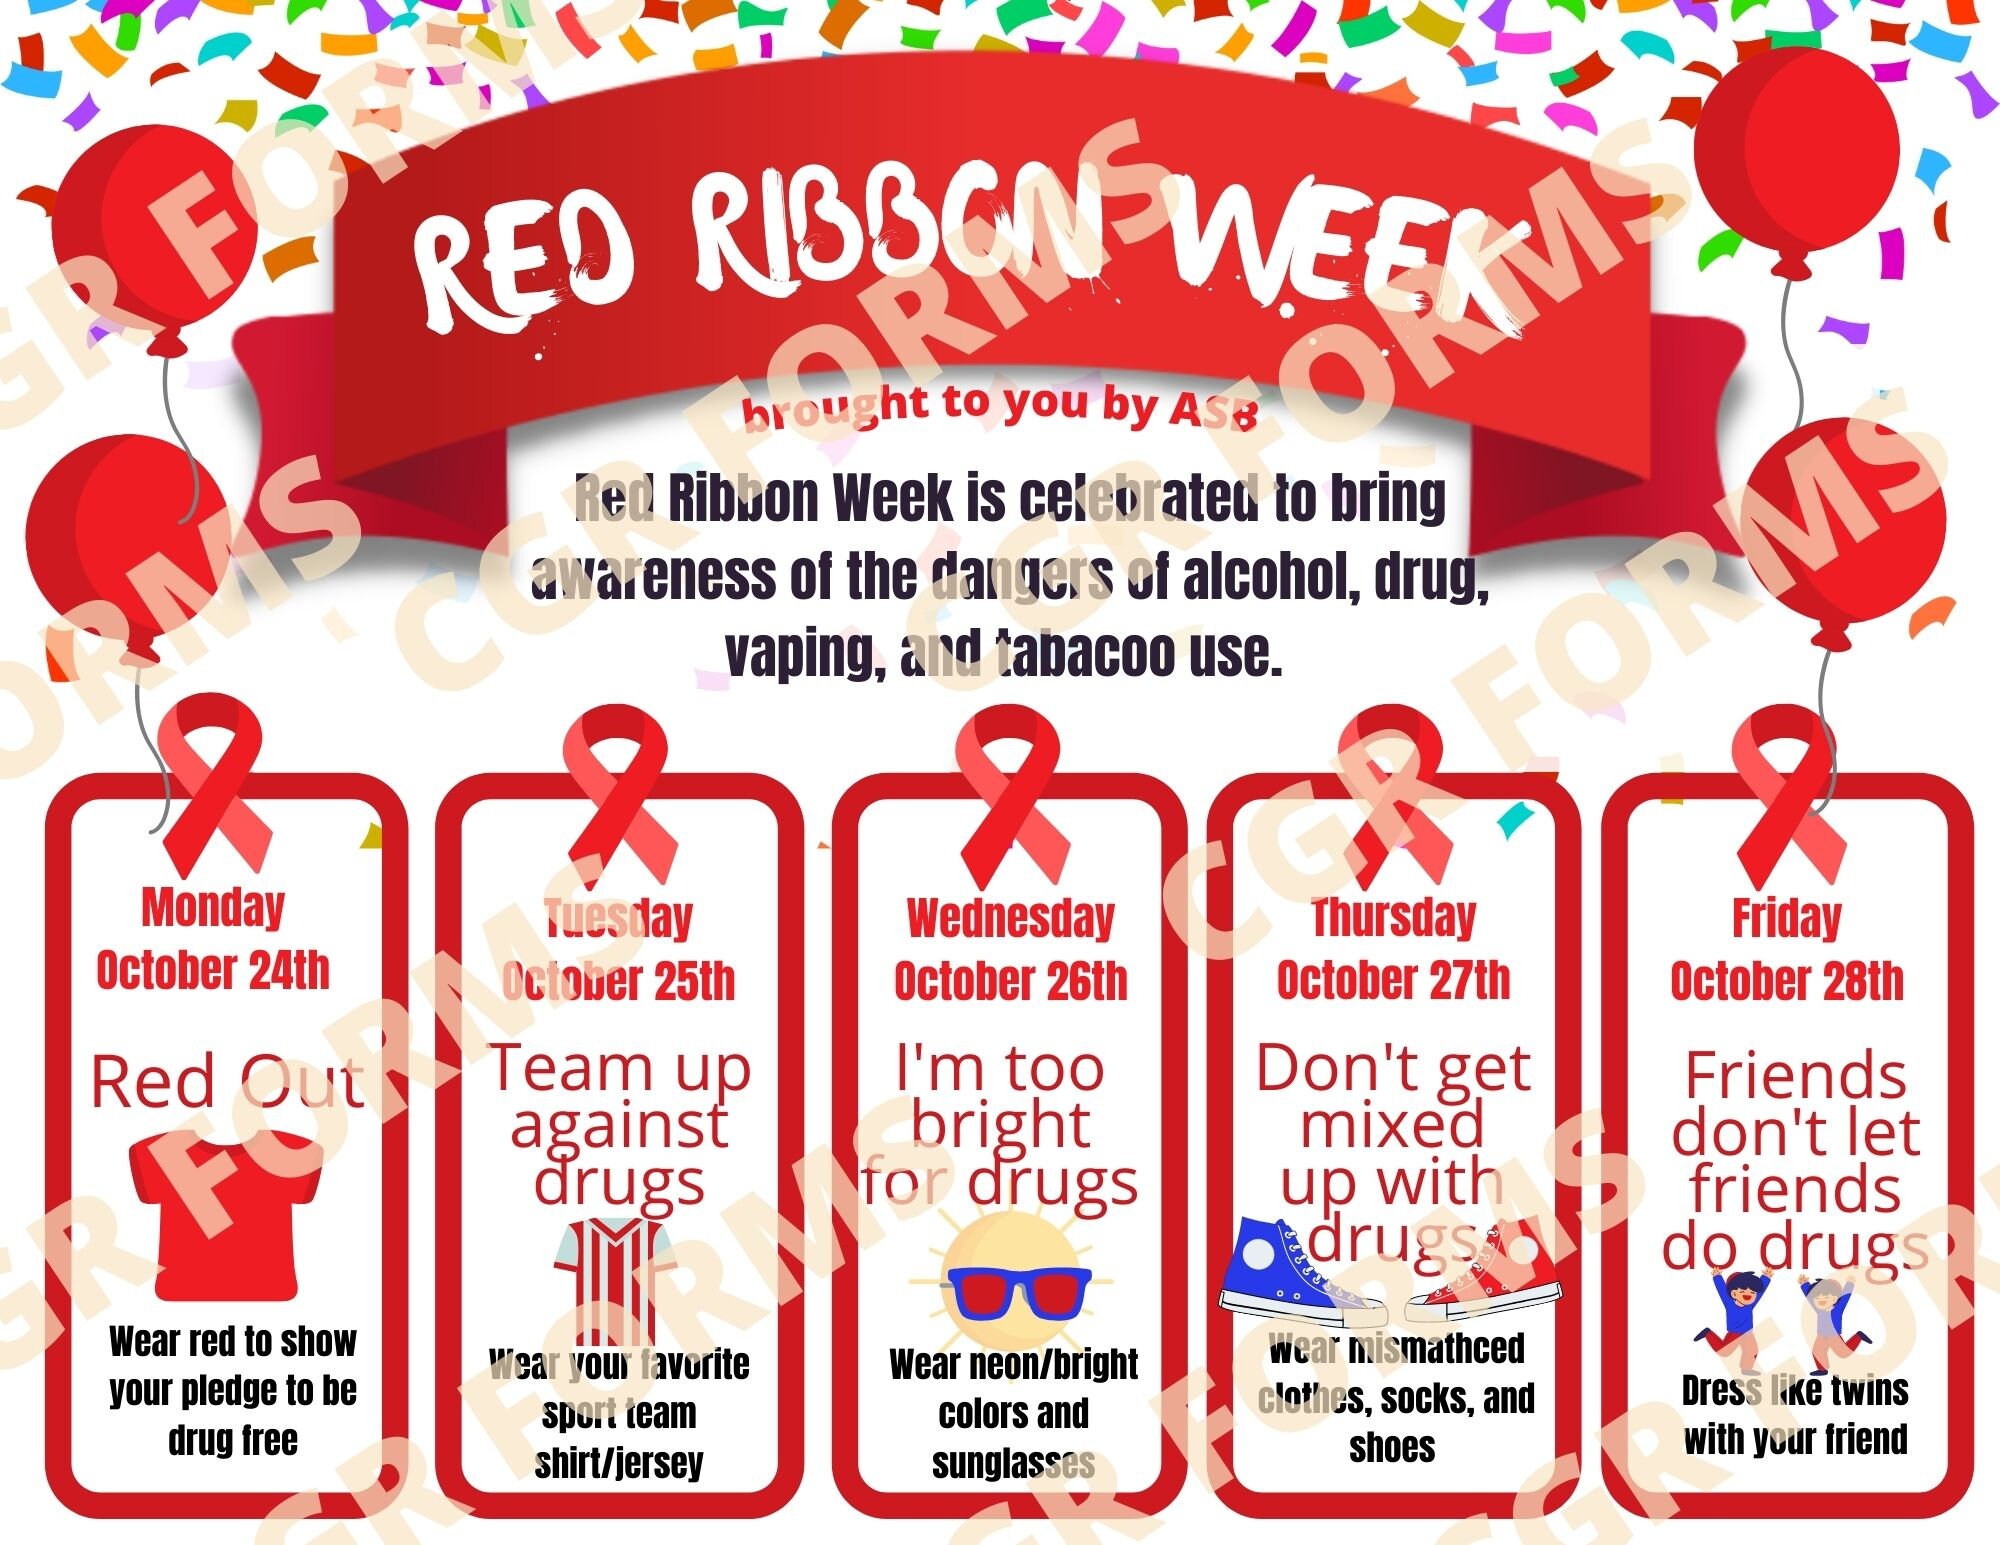 Save on Fundraiser, Red Ribbon Week